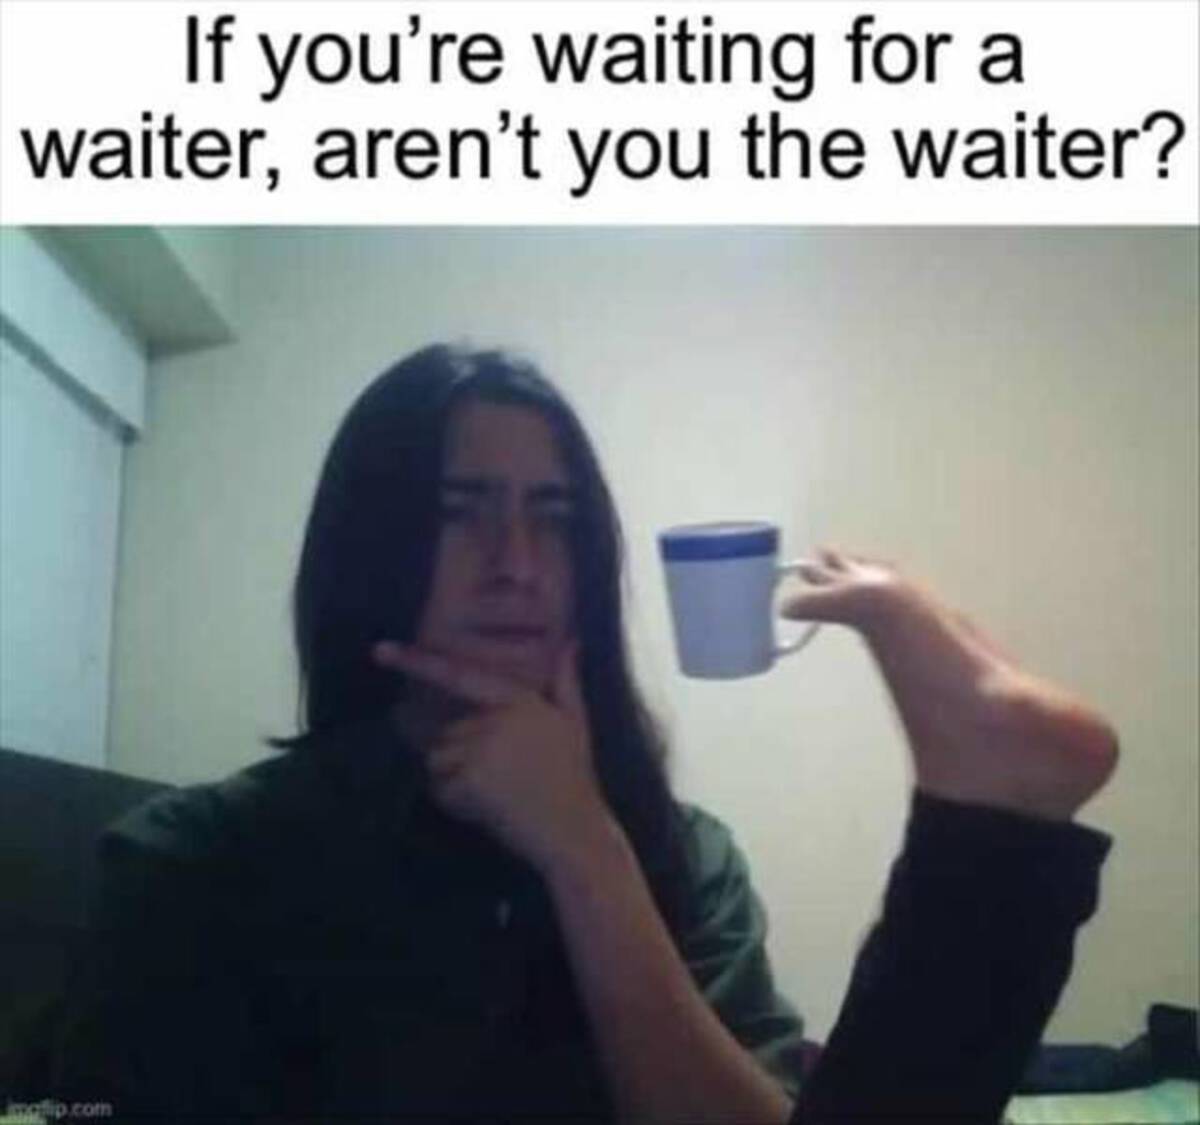 deep thinking meme - If you're waiting for a waiter, aren't you the waiter? motip.com